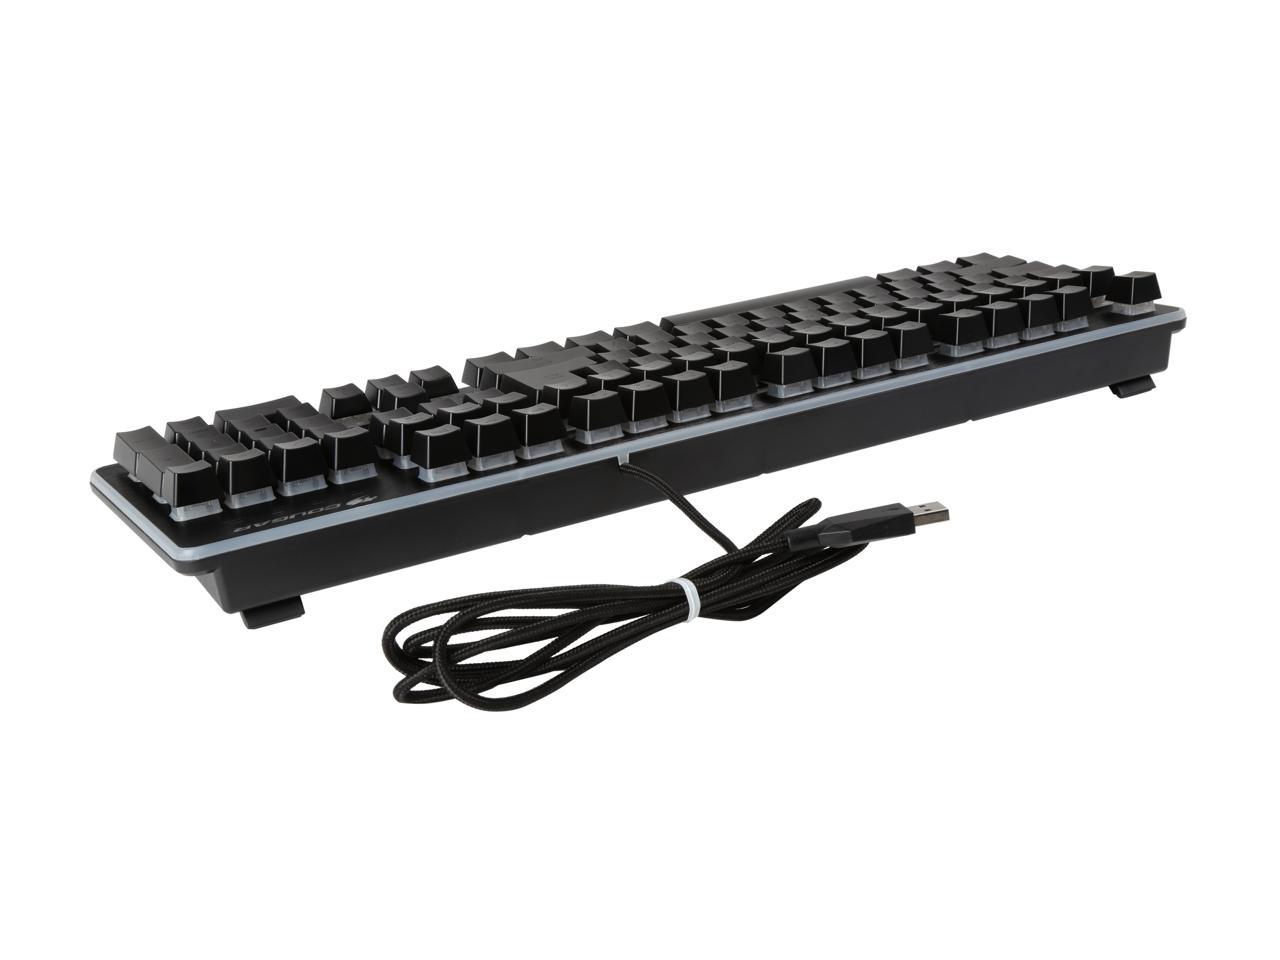 Cougar Deathfire EX Gaming Hybrid Mechanical Keyboard and Mice Combo